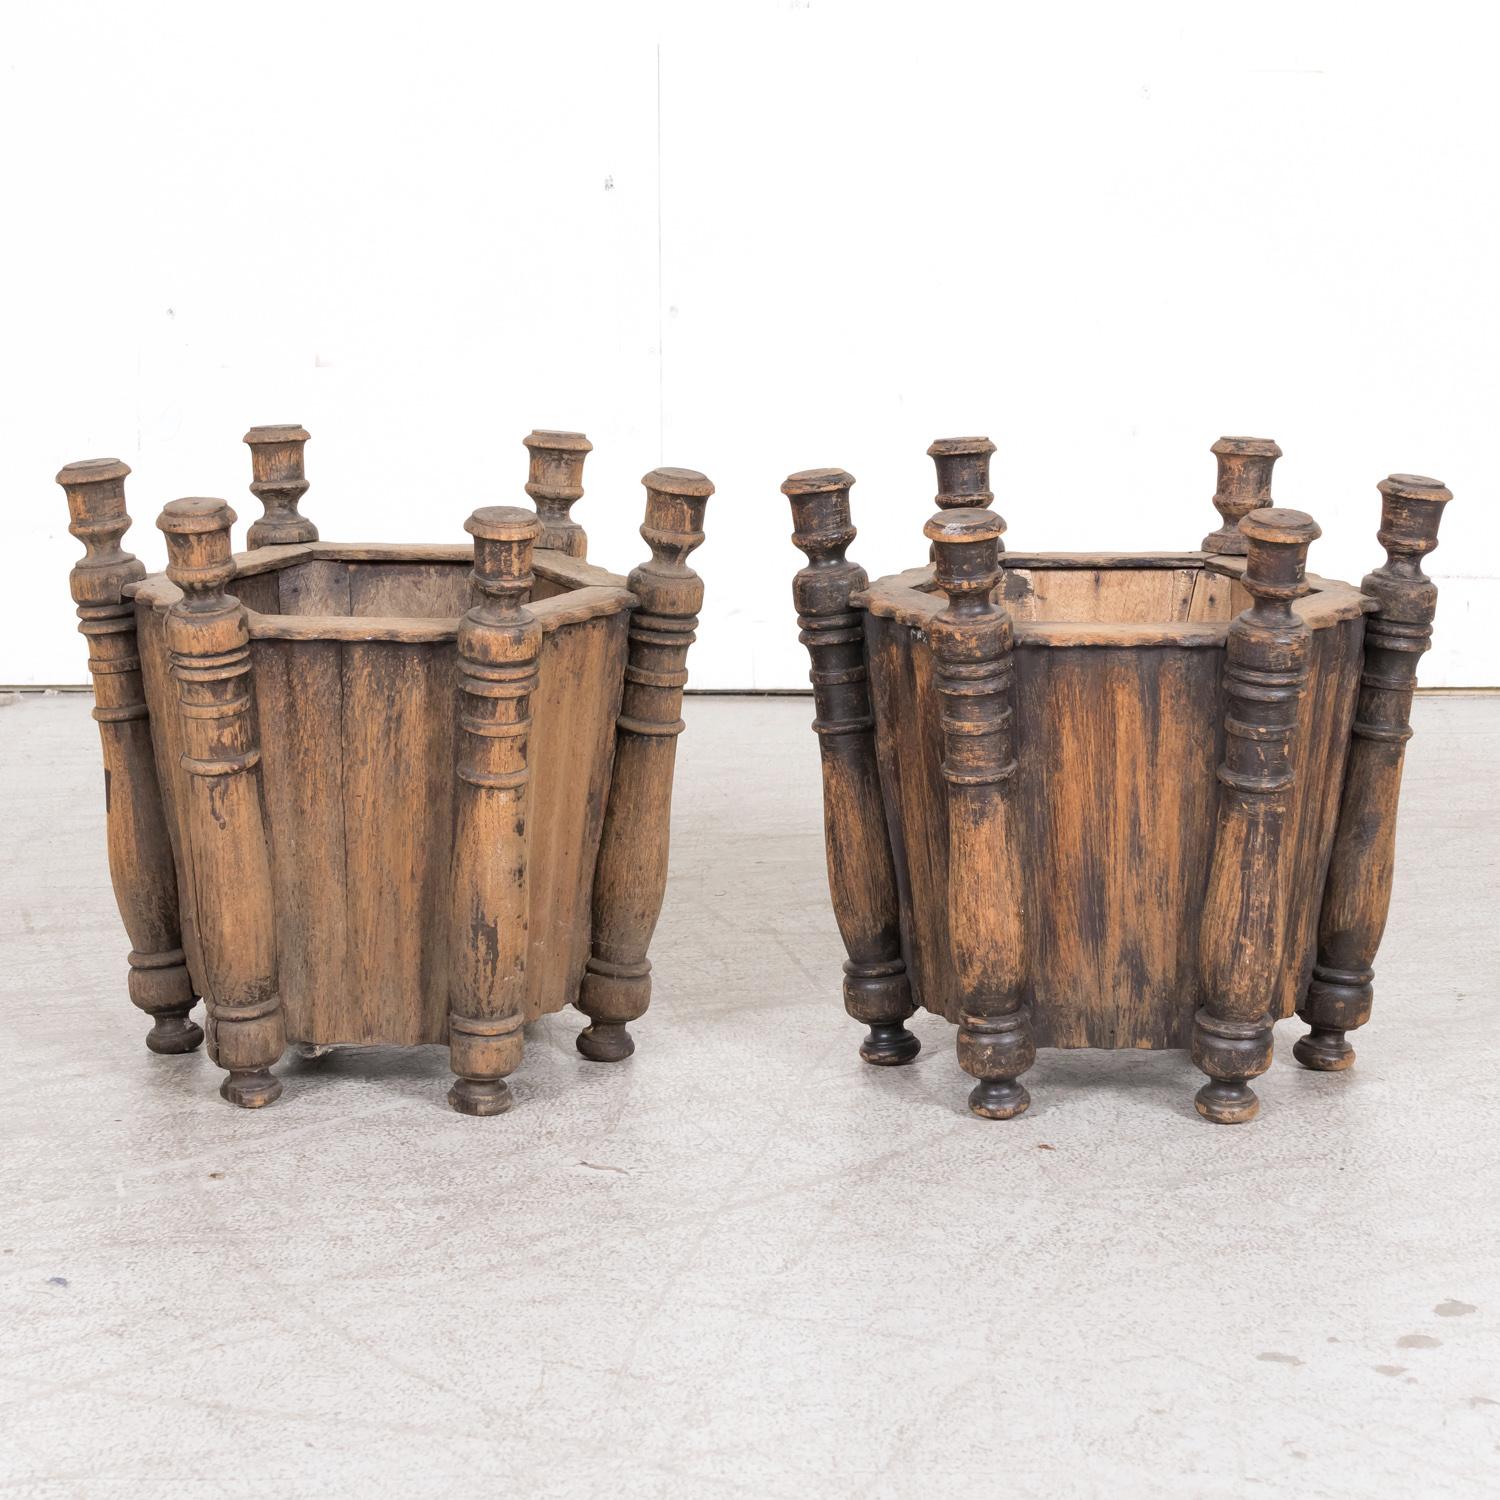 Pair of Antique French Carved Oak Hexagonal Planters or Jardinieres In Good Condition For Sale In Birmingham, AL